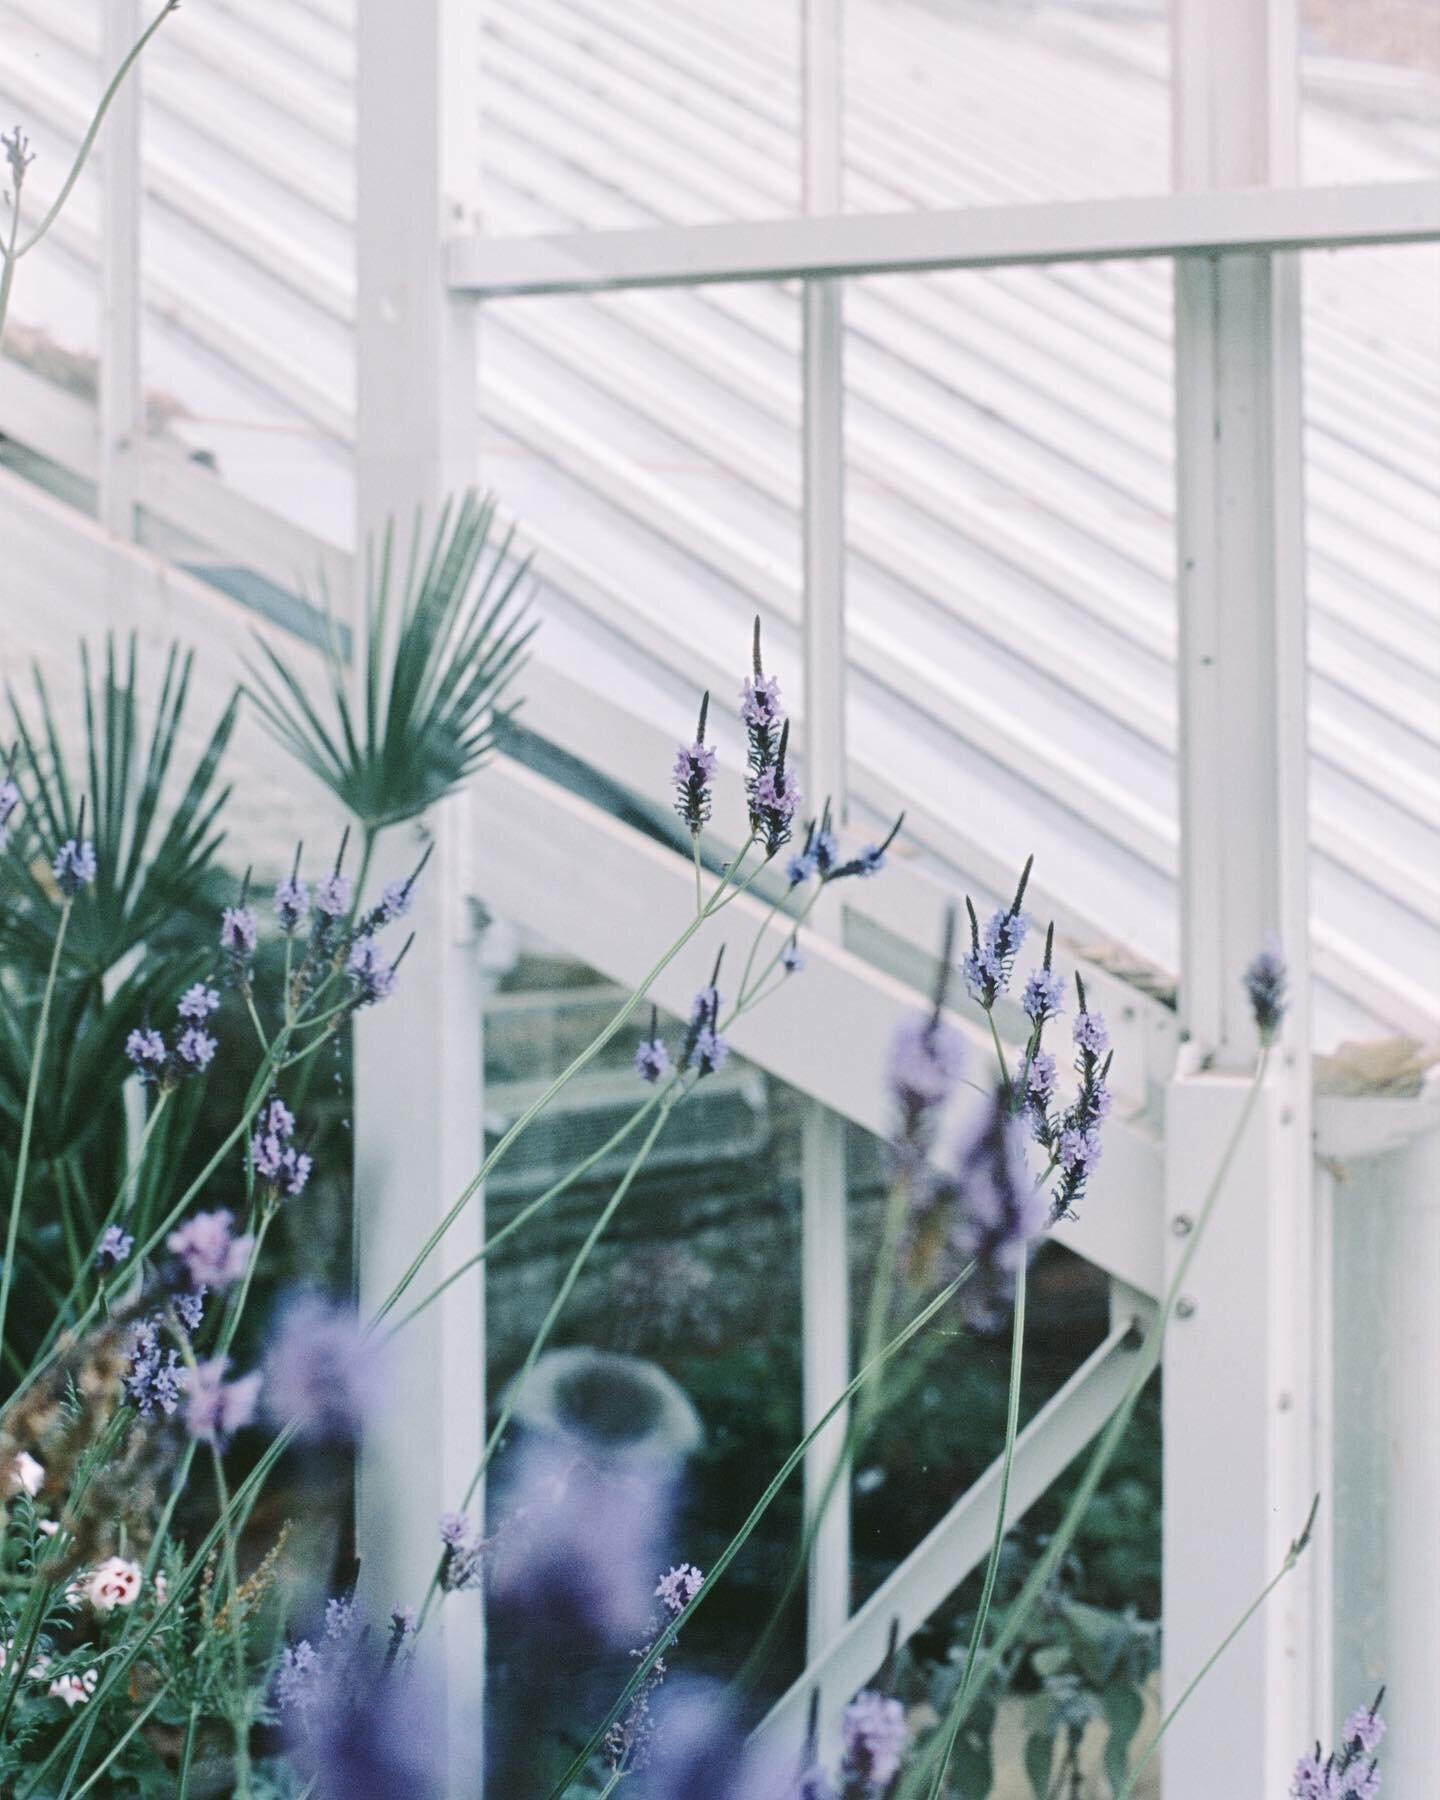 Found a greenhouse in London, a quiet moment for us Dorset gals in the big city!

I prefer using my film camera when travelling or spending a couple of nights in a city. It helps bring me back to my original love of photography as a grounding hobby

